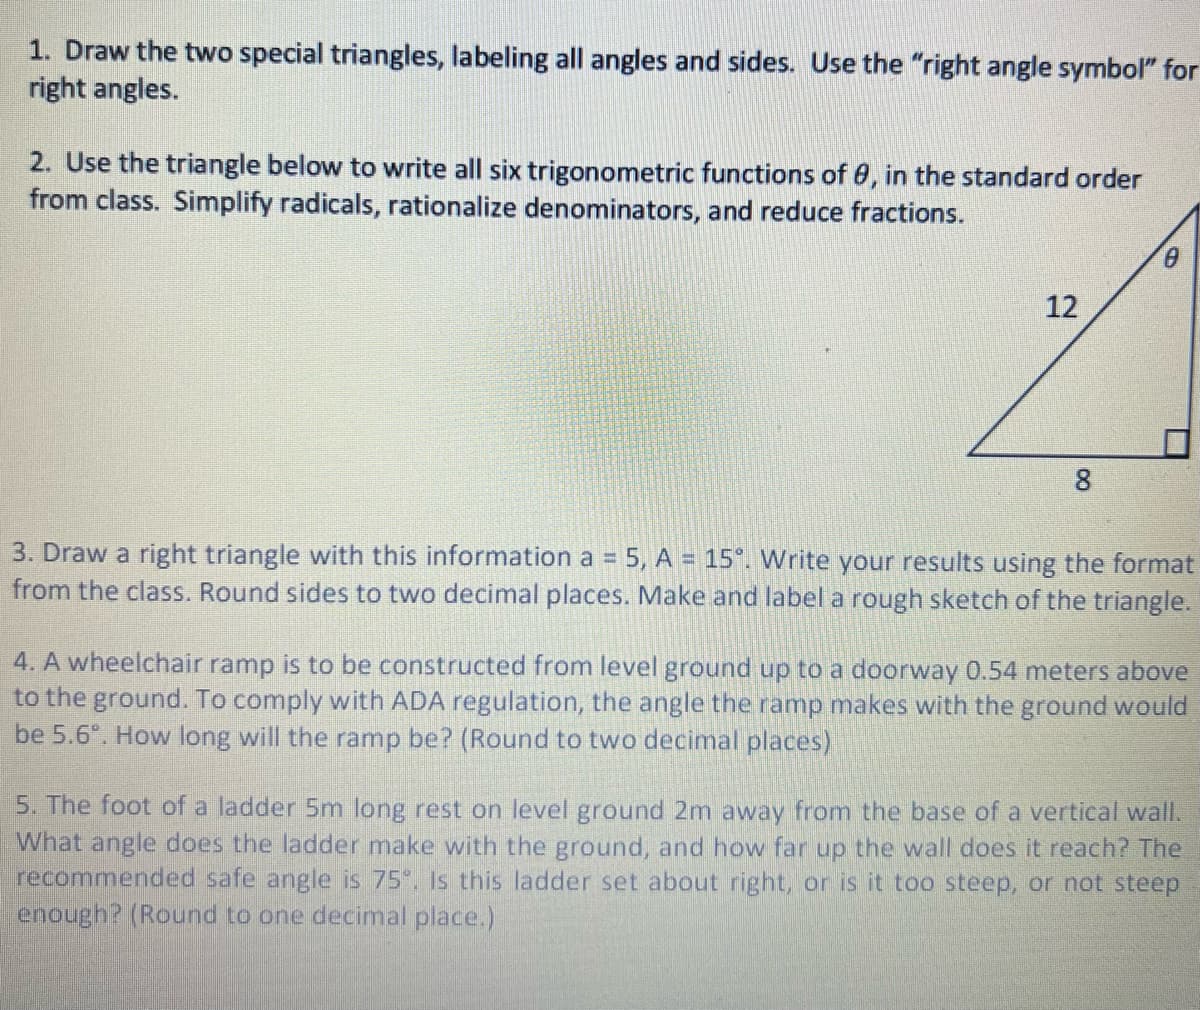 1. Draw the two special triangles, labeling all angles and sides. Use the "right angle symbol" for
right angles.
2. Use the triangle below to write all six trigonometric functions of 0, in the standard order
from class. Simplify radicals, rationalize denominators, and reduce fractions.
12
8.
3. Draw a right triangle with this information a = 5, A = 15°. Write your results using the format
from the class. Round sides to two decimal places. Make and label a rough sketch of the triangle.
%3D
4. A wheelchair ramp is to be constructed from level ground up to a doorway 0.54 meters above
to the ground. To comply with ADA regulation, the angle the ramp makes with the ground would
be 5.6°. How long will the ramp be? (Round to two decimal places)
5. The foot of a ladder 5m long rest on level ground 2m away from the base of a vertical wall.
What angle does the ladder make with the ground, and how far up the wall does it reach? The
recommended safe angle is 75. Is this ladder set about right, or is it too steep, or not steep
enough? (Round to one decimal place.)
